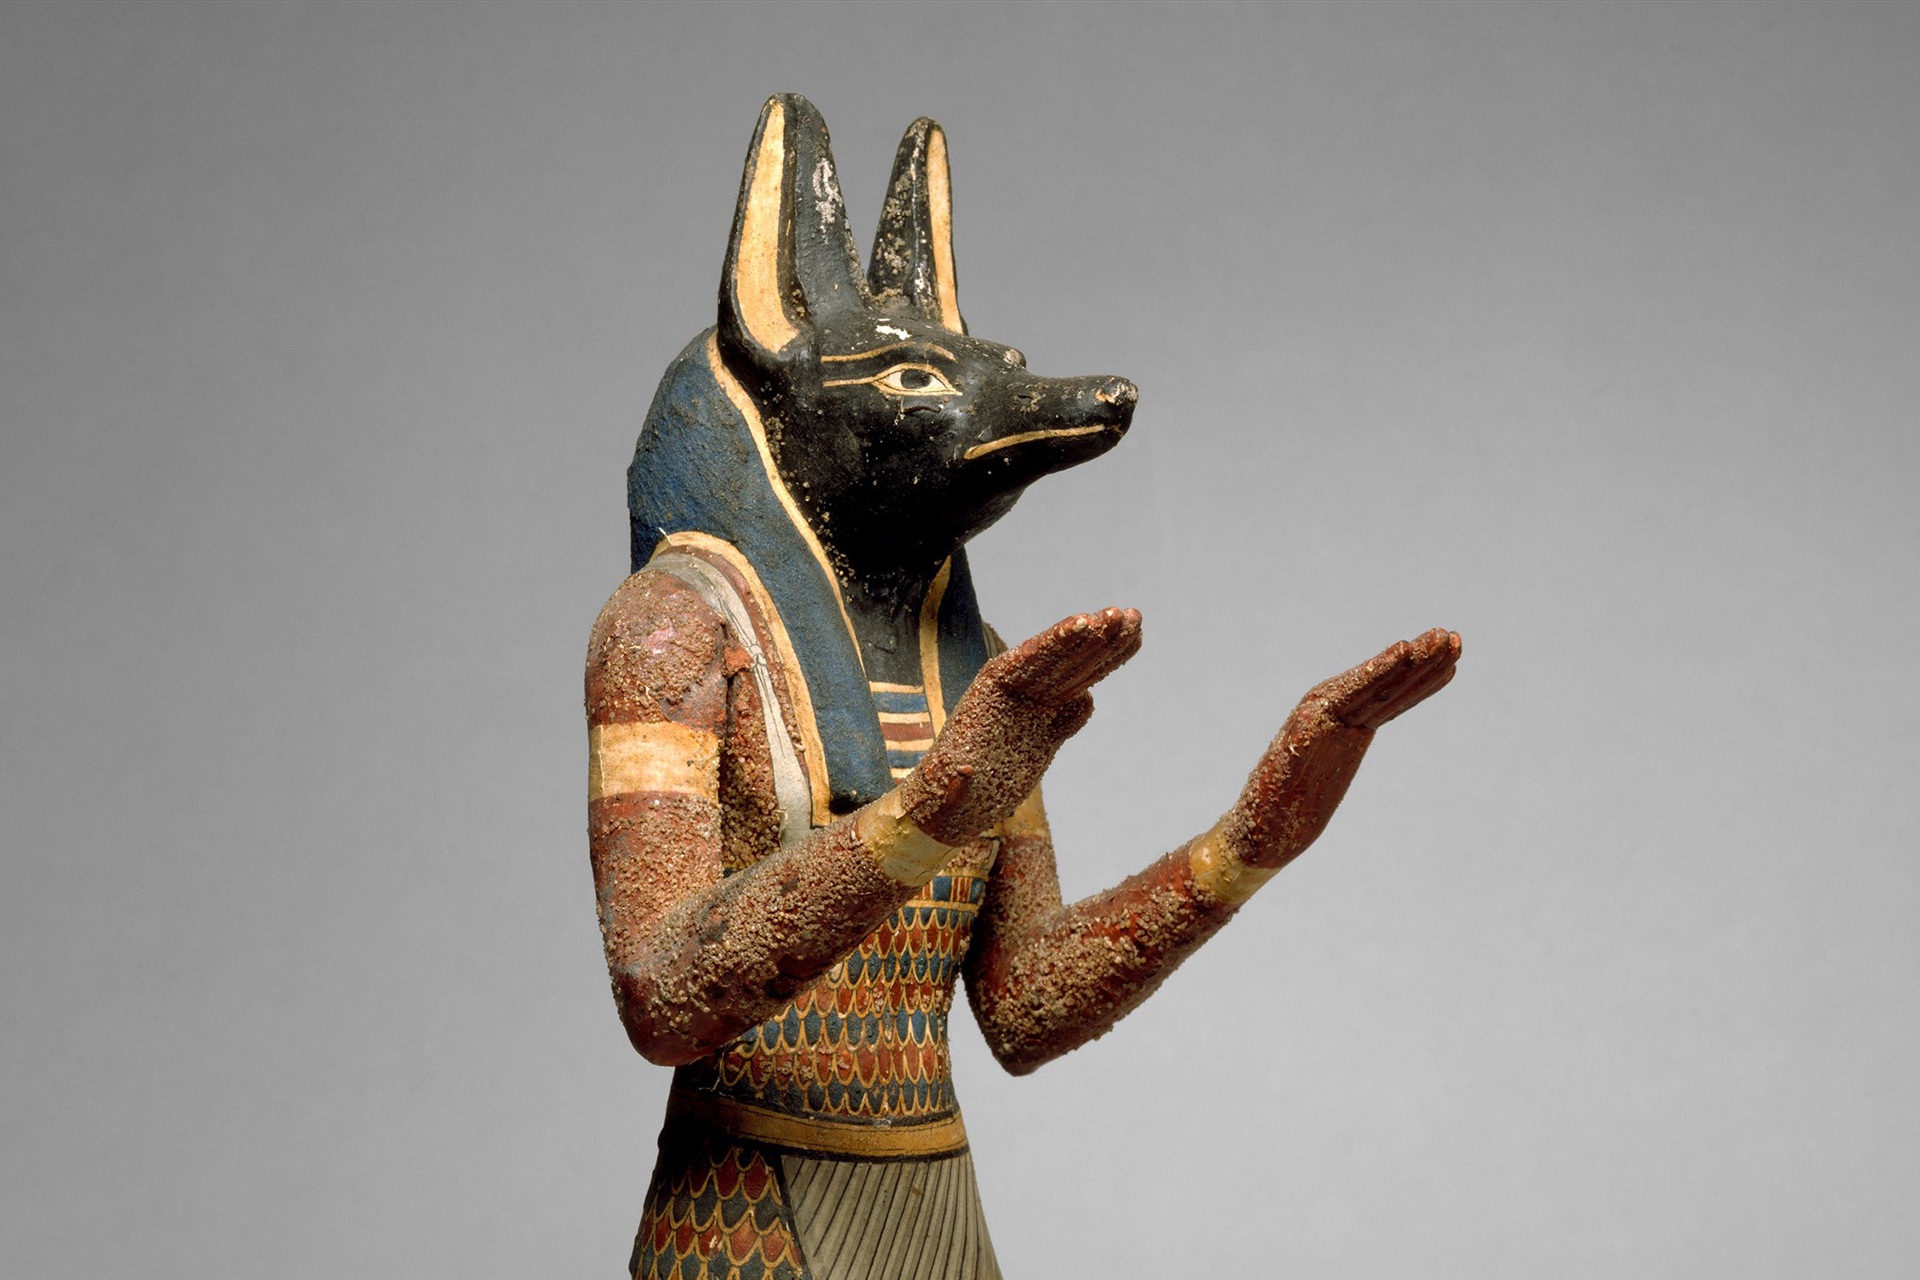 Representation of Anubis in Ancient Egyptian Art